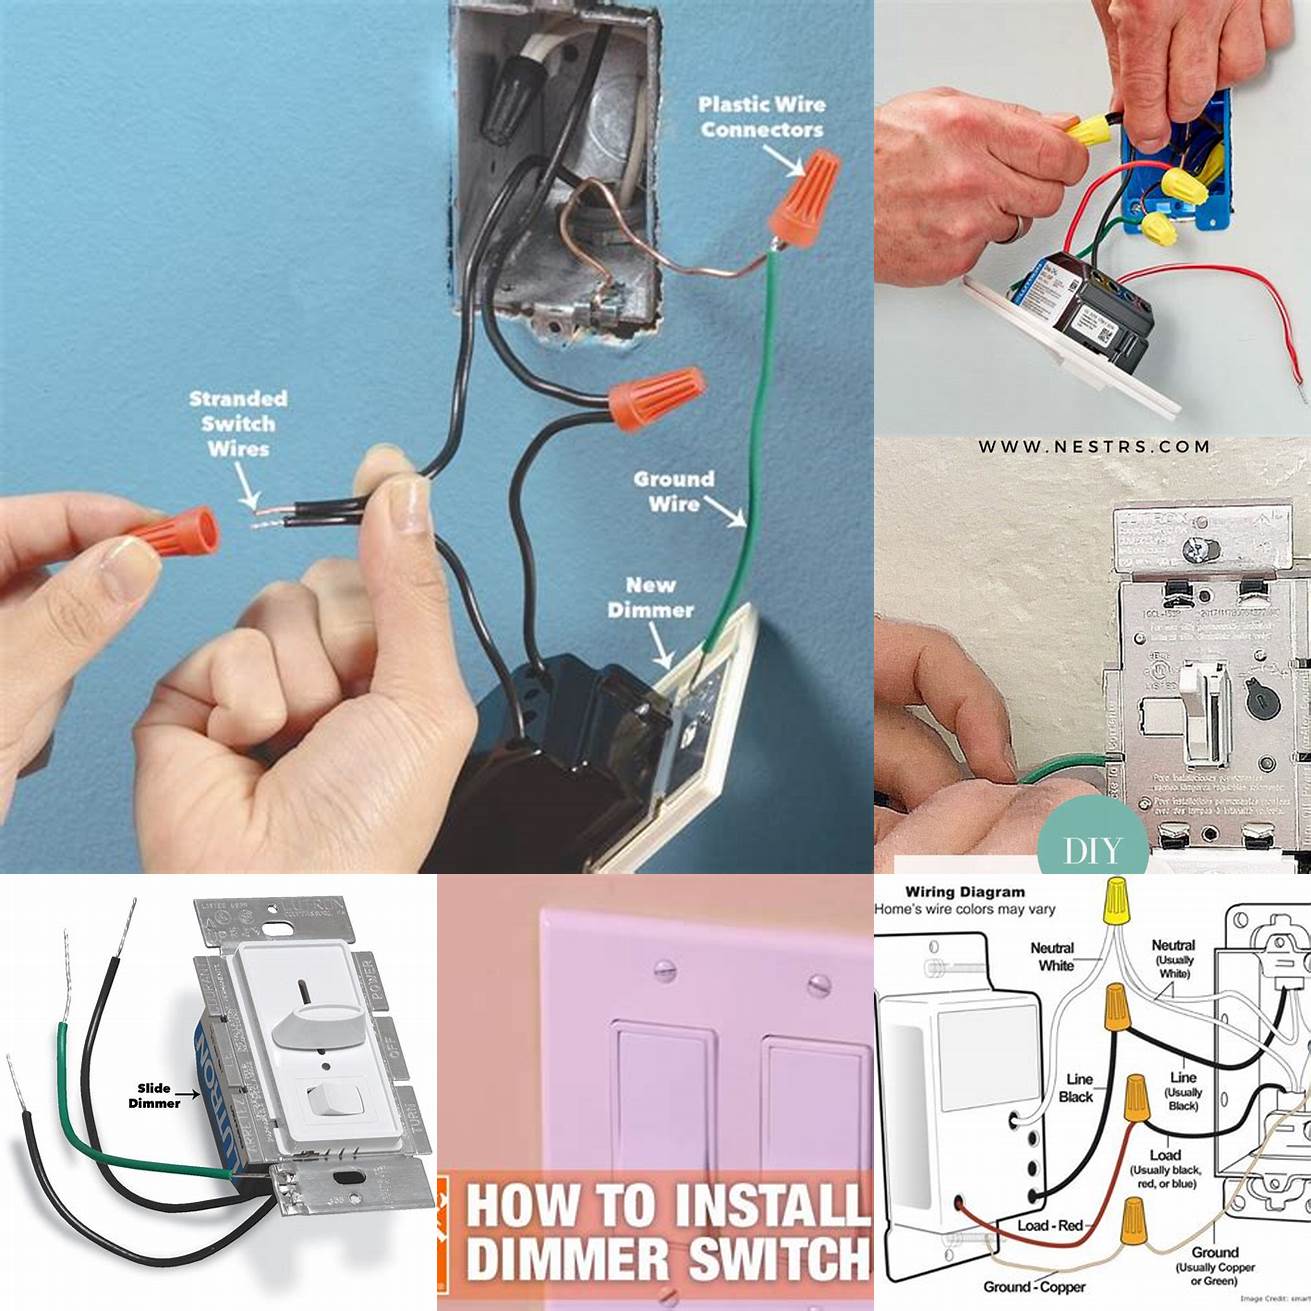 4 Install a dimmer switch